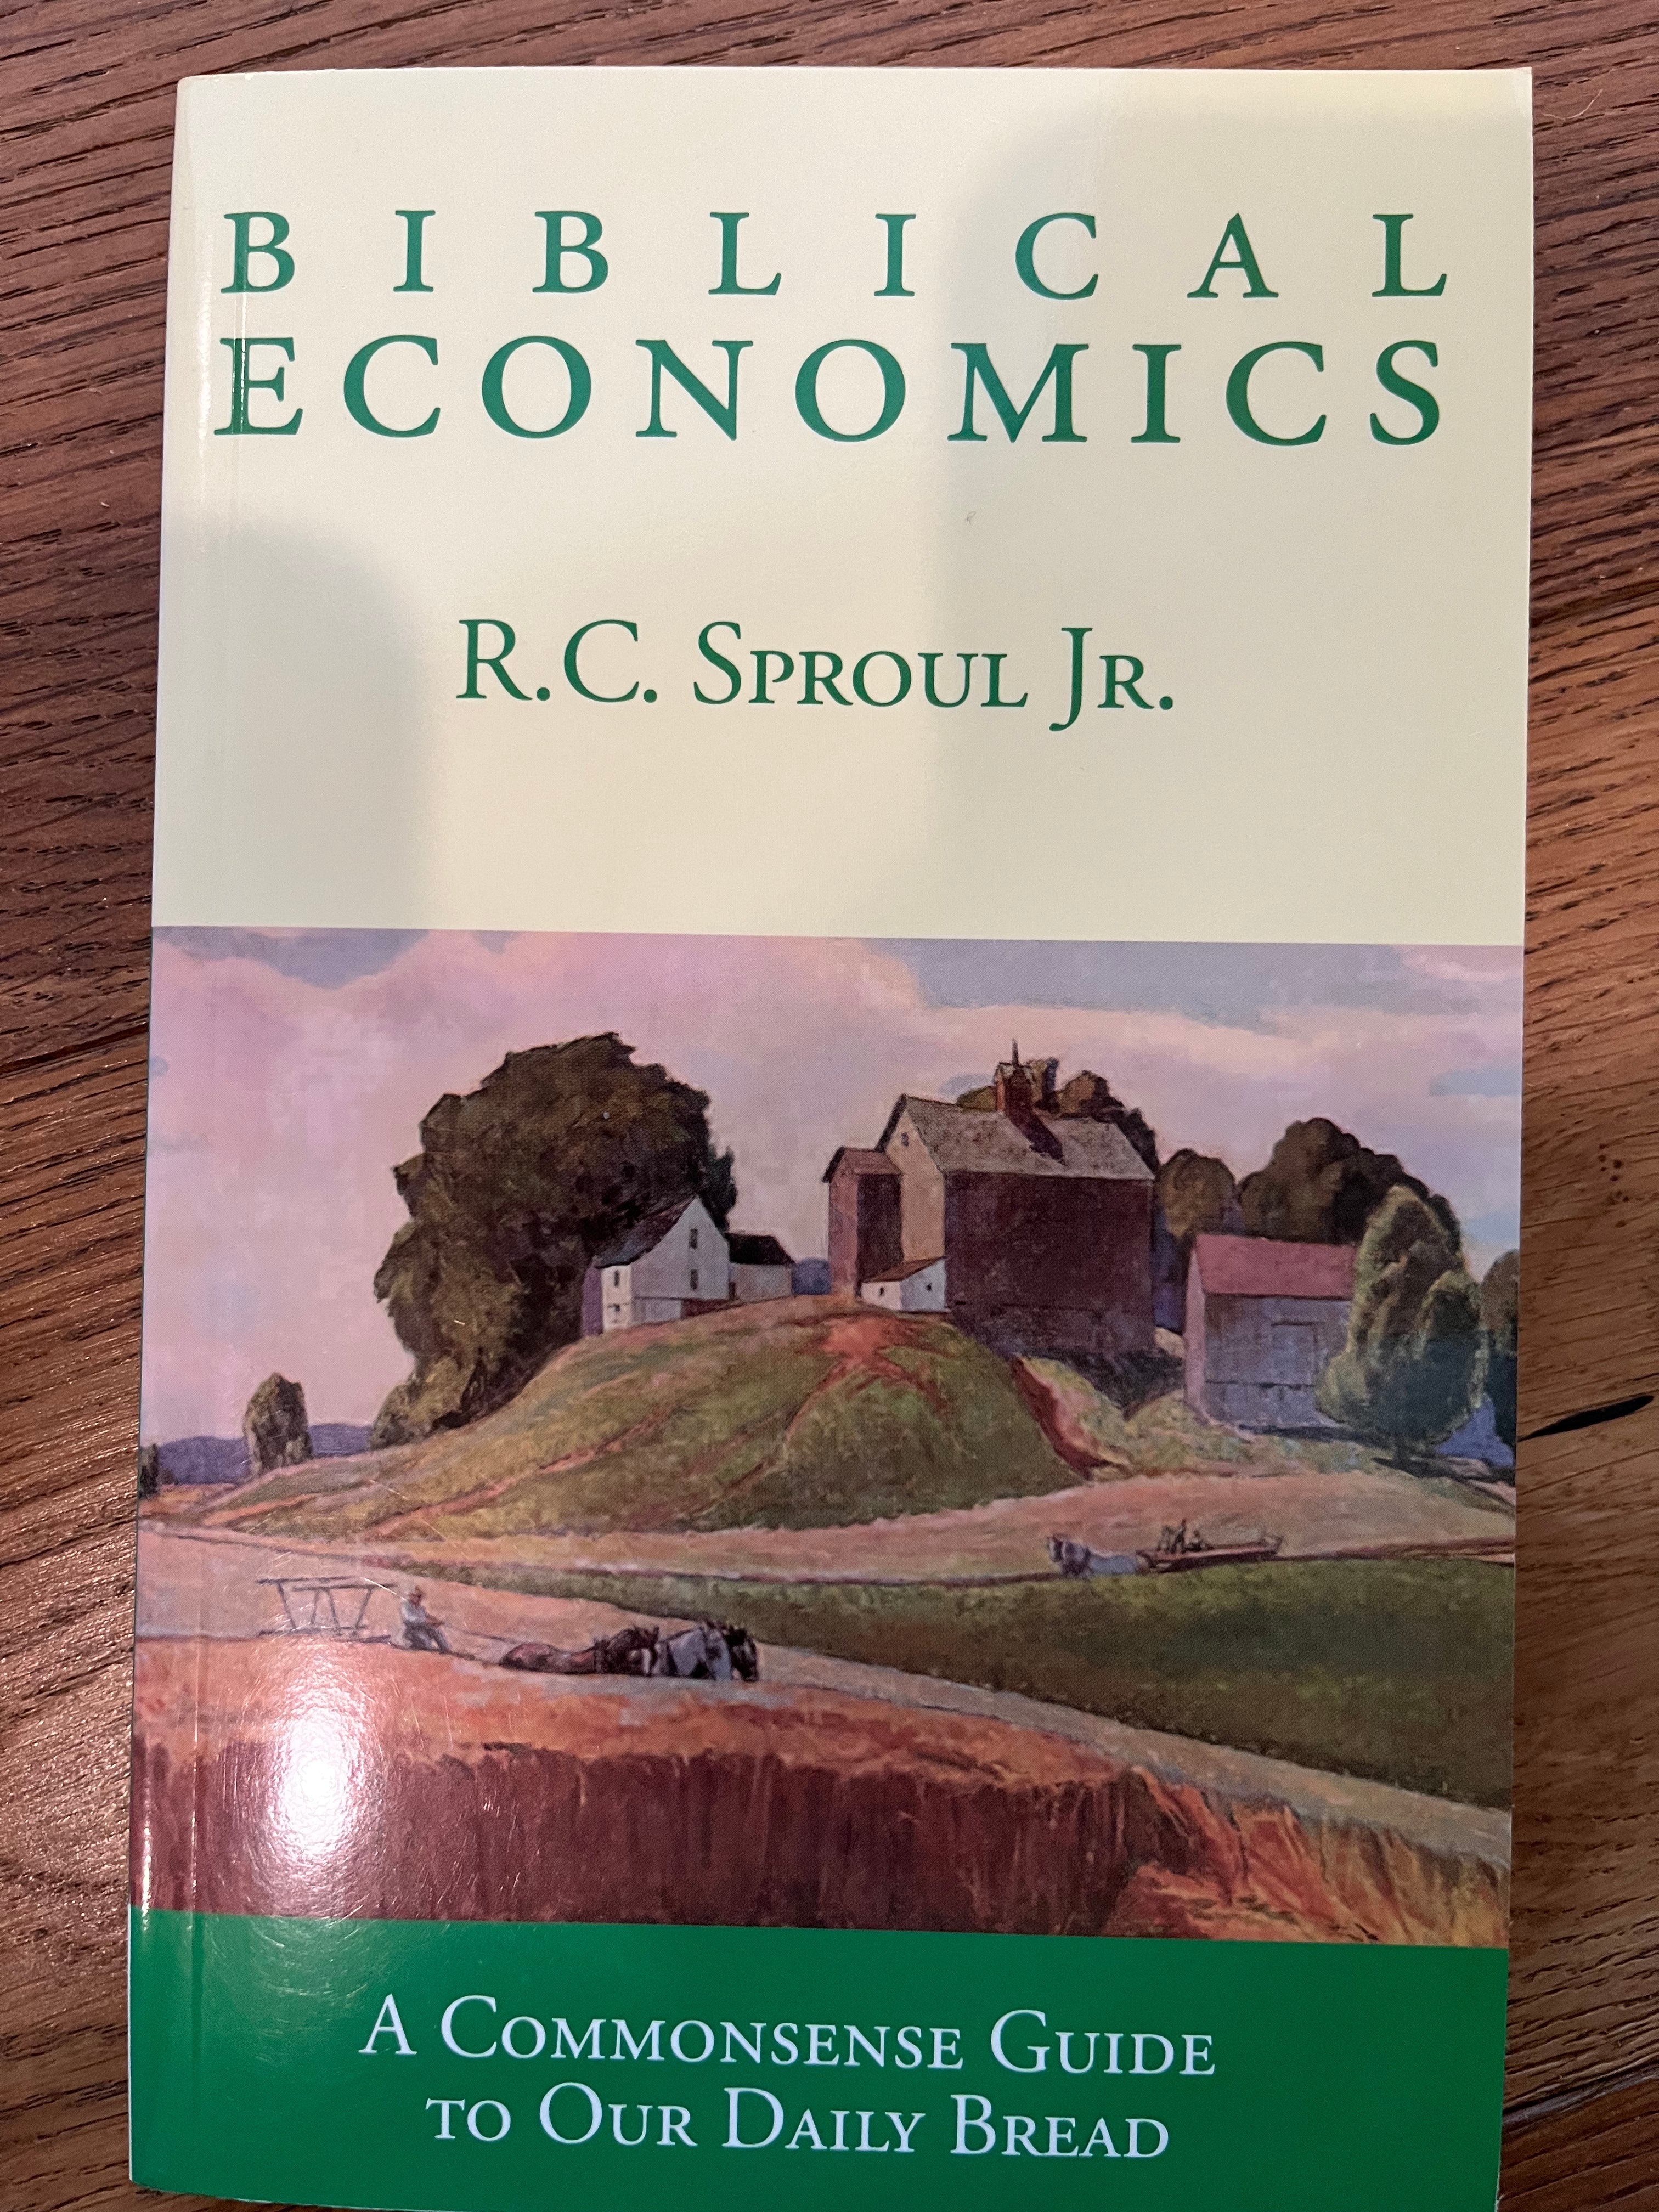  The Common Sense, Economical, Guide to Buying New